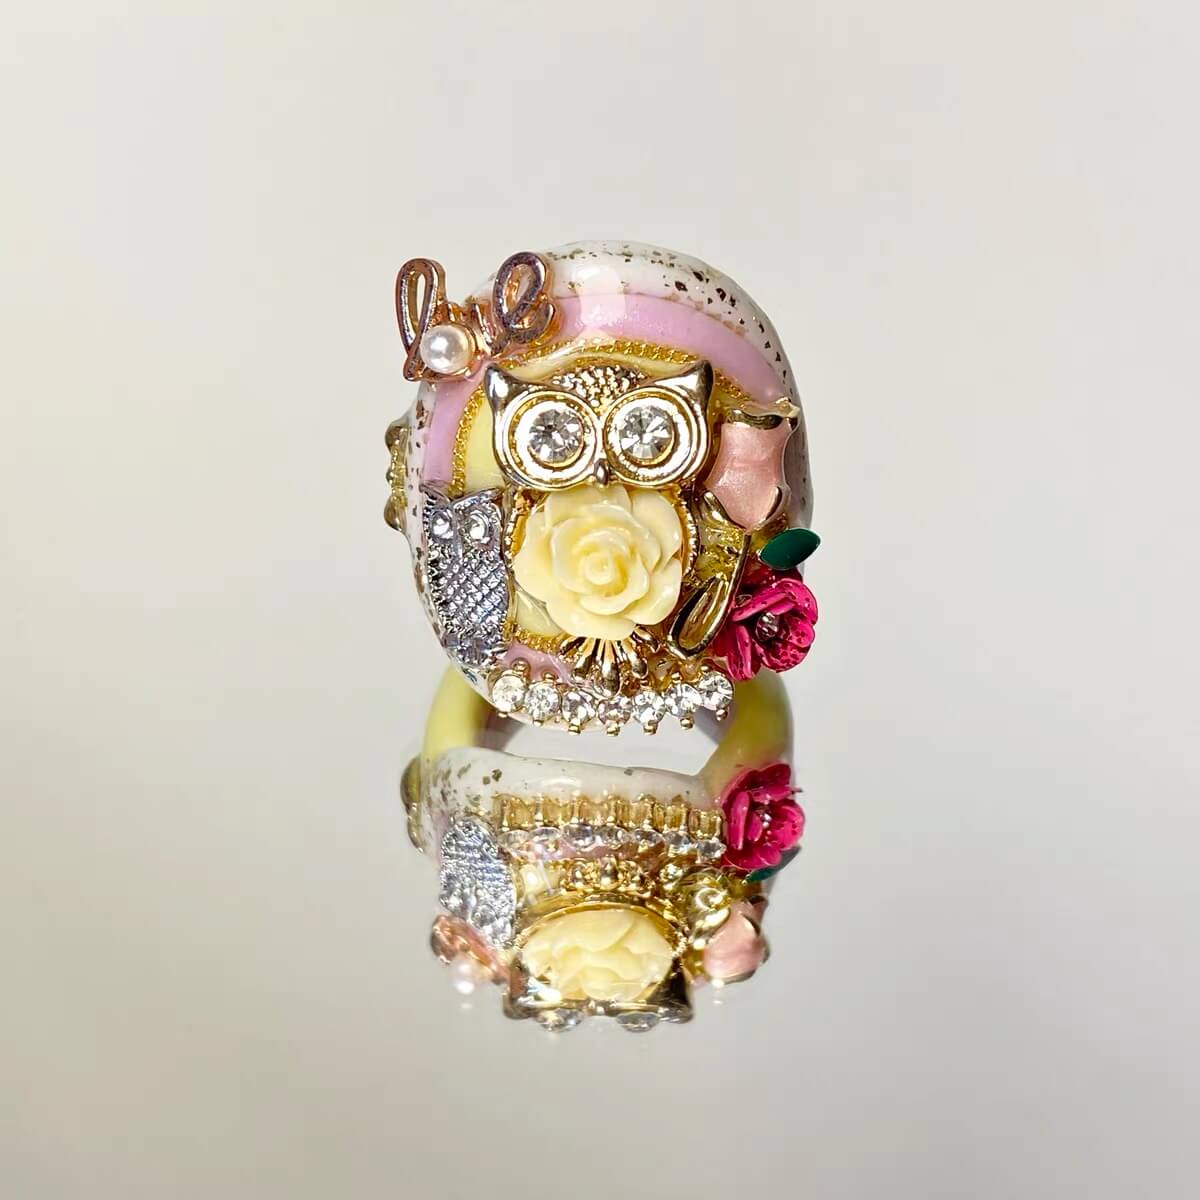 Öddsome Dreamland Collection-Owl's Dreamscape Ring Front View